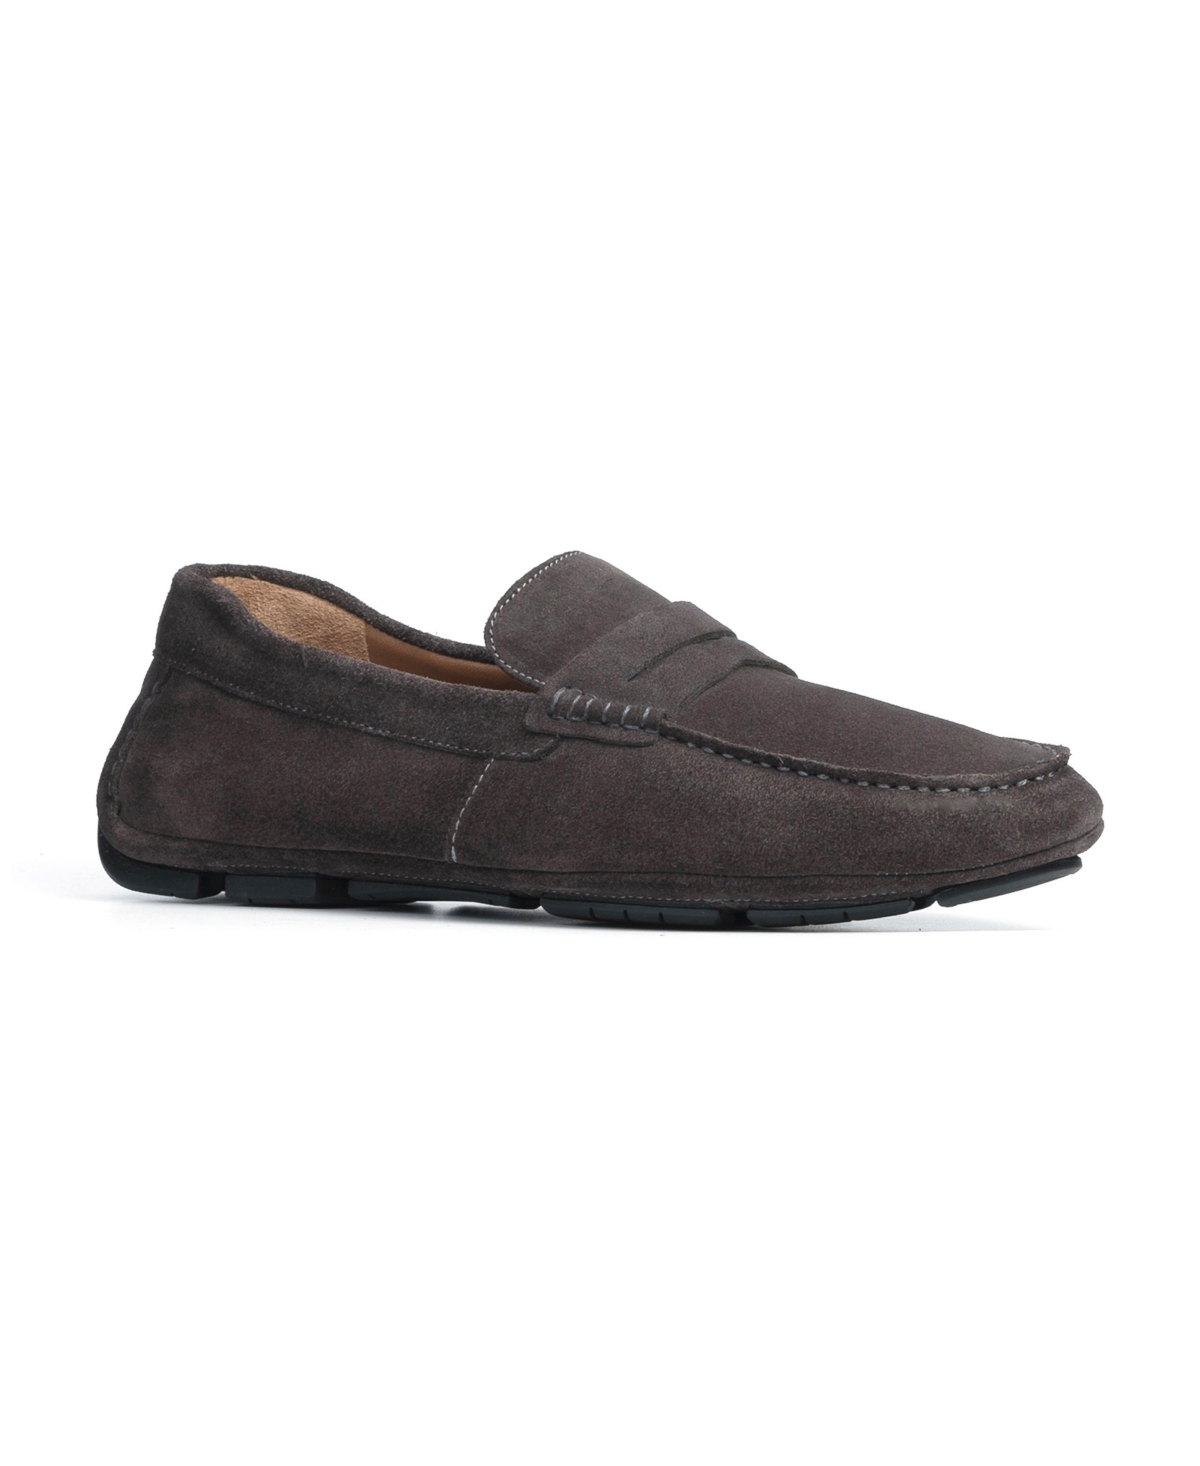 Anthony Veer Men's Cruise Driver Slip-on Leather Loafers In Chocolate Brown